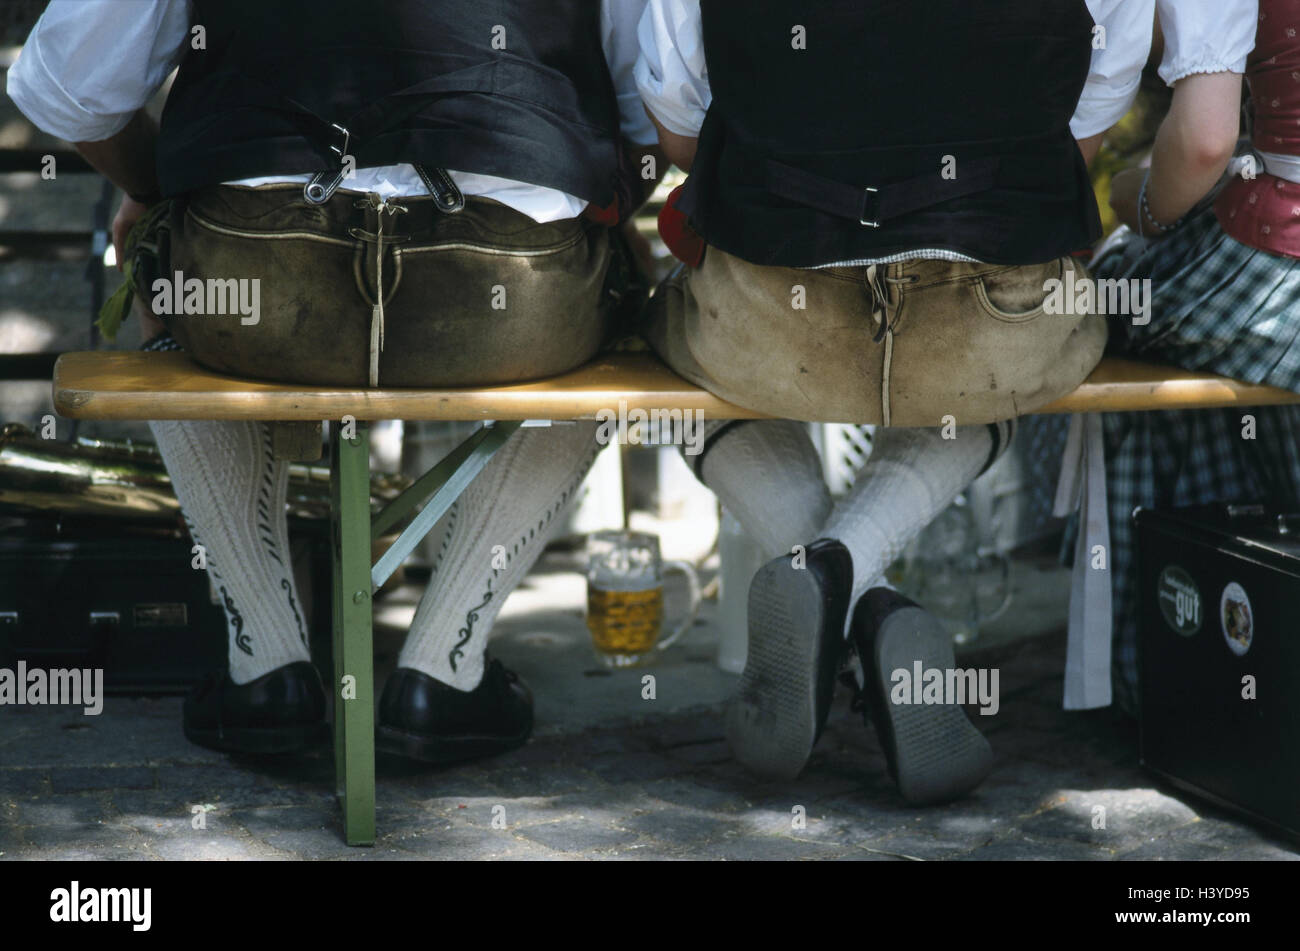 Beer garden, bank, men, leather ball trousers, sit, detail, outside, summer, summery, national costumes, folklore, folklore clothes, leisure time, leather ball trousers Stock Photo